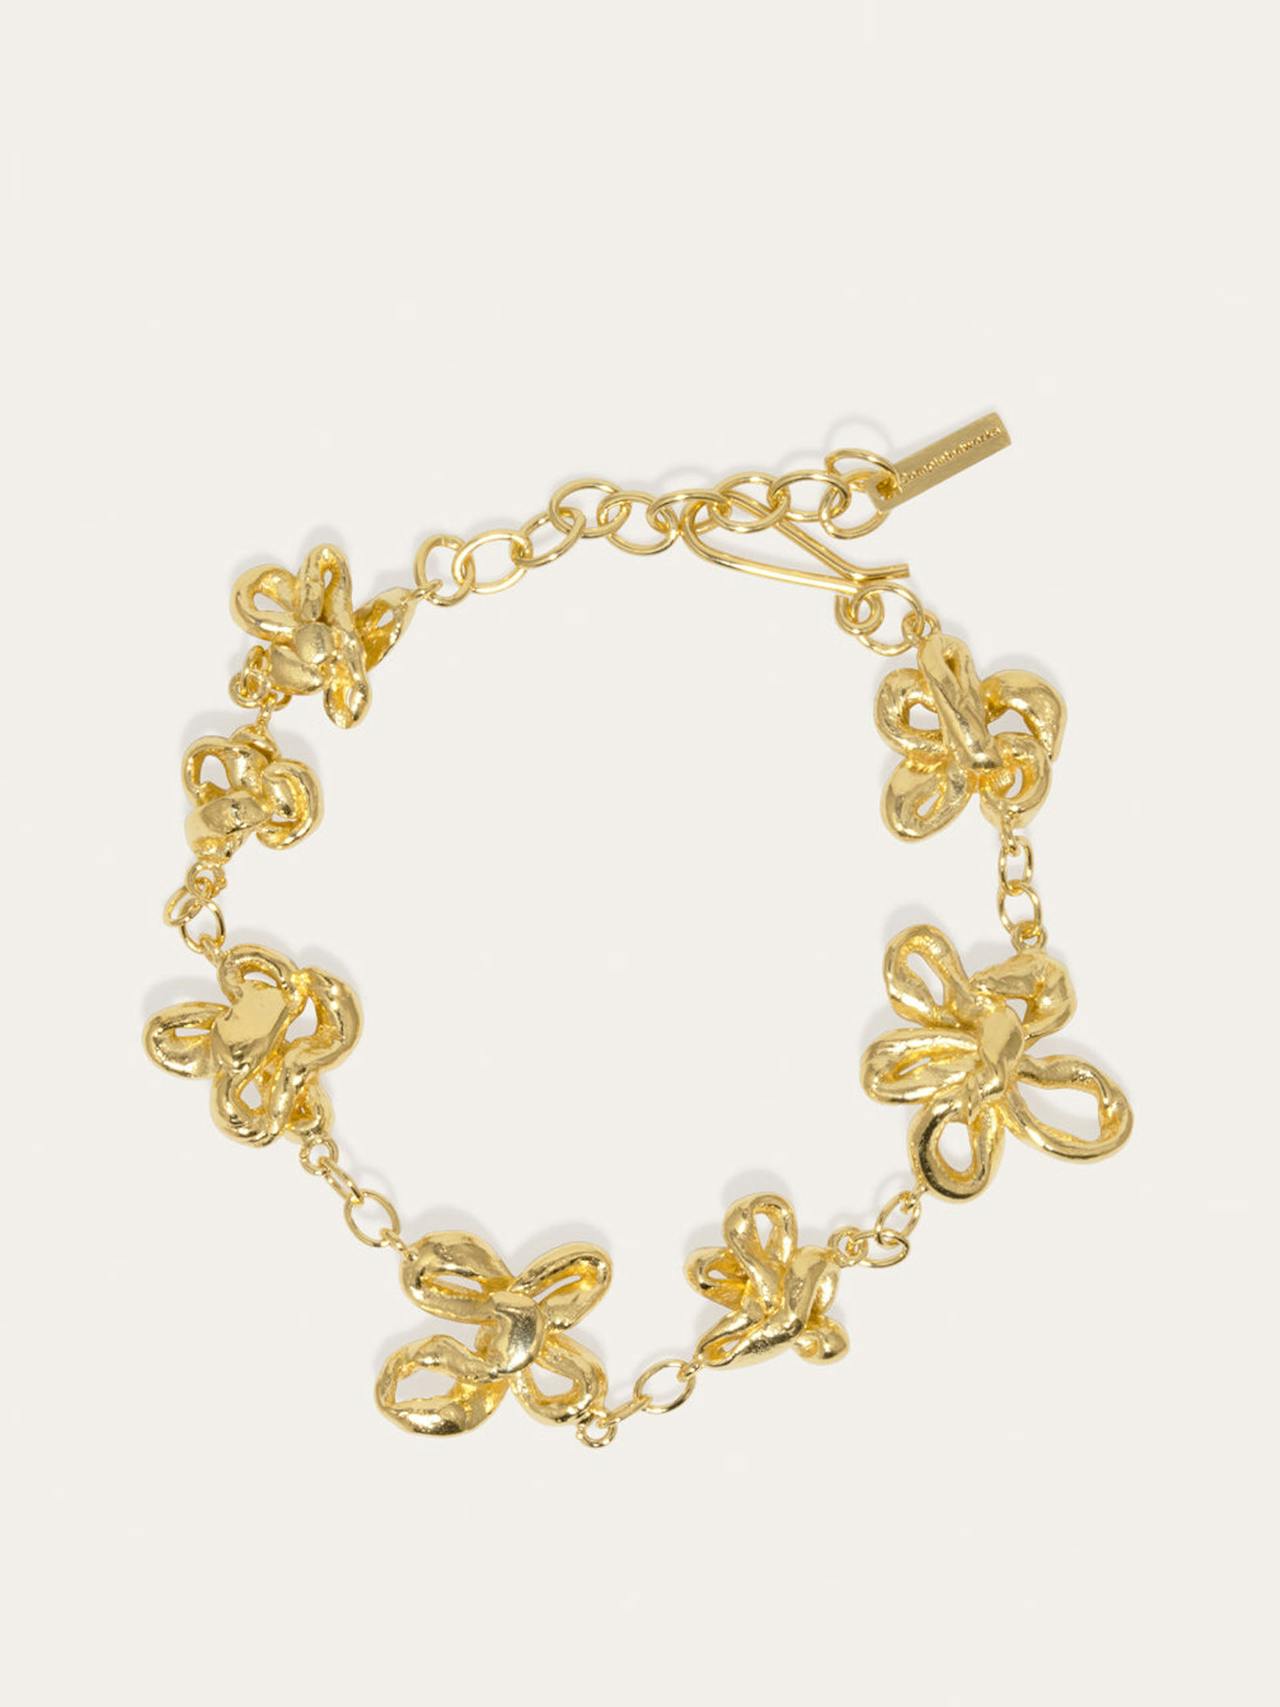 The Past Within The Present gold plated bracelet